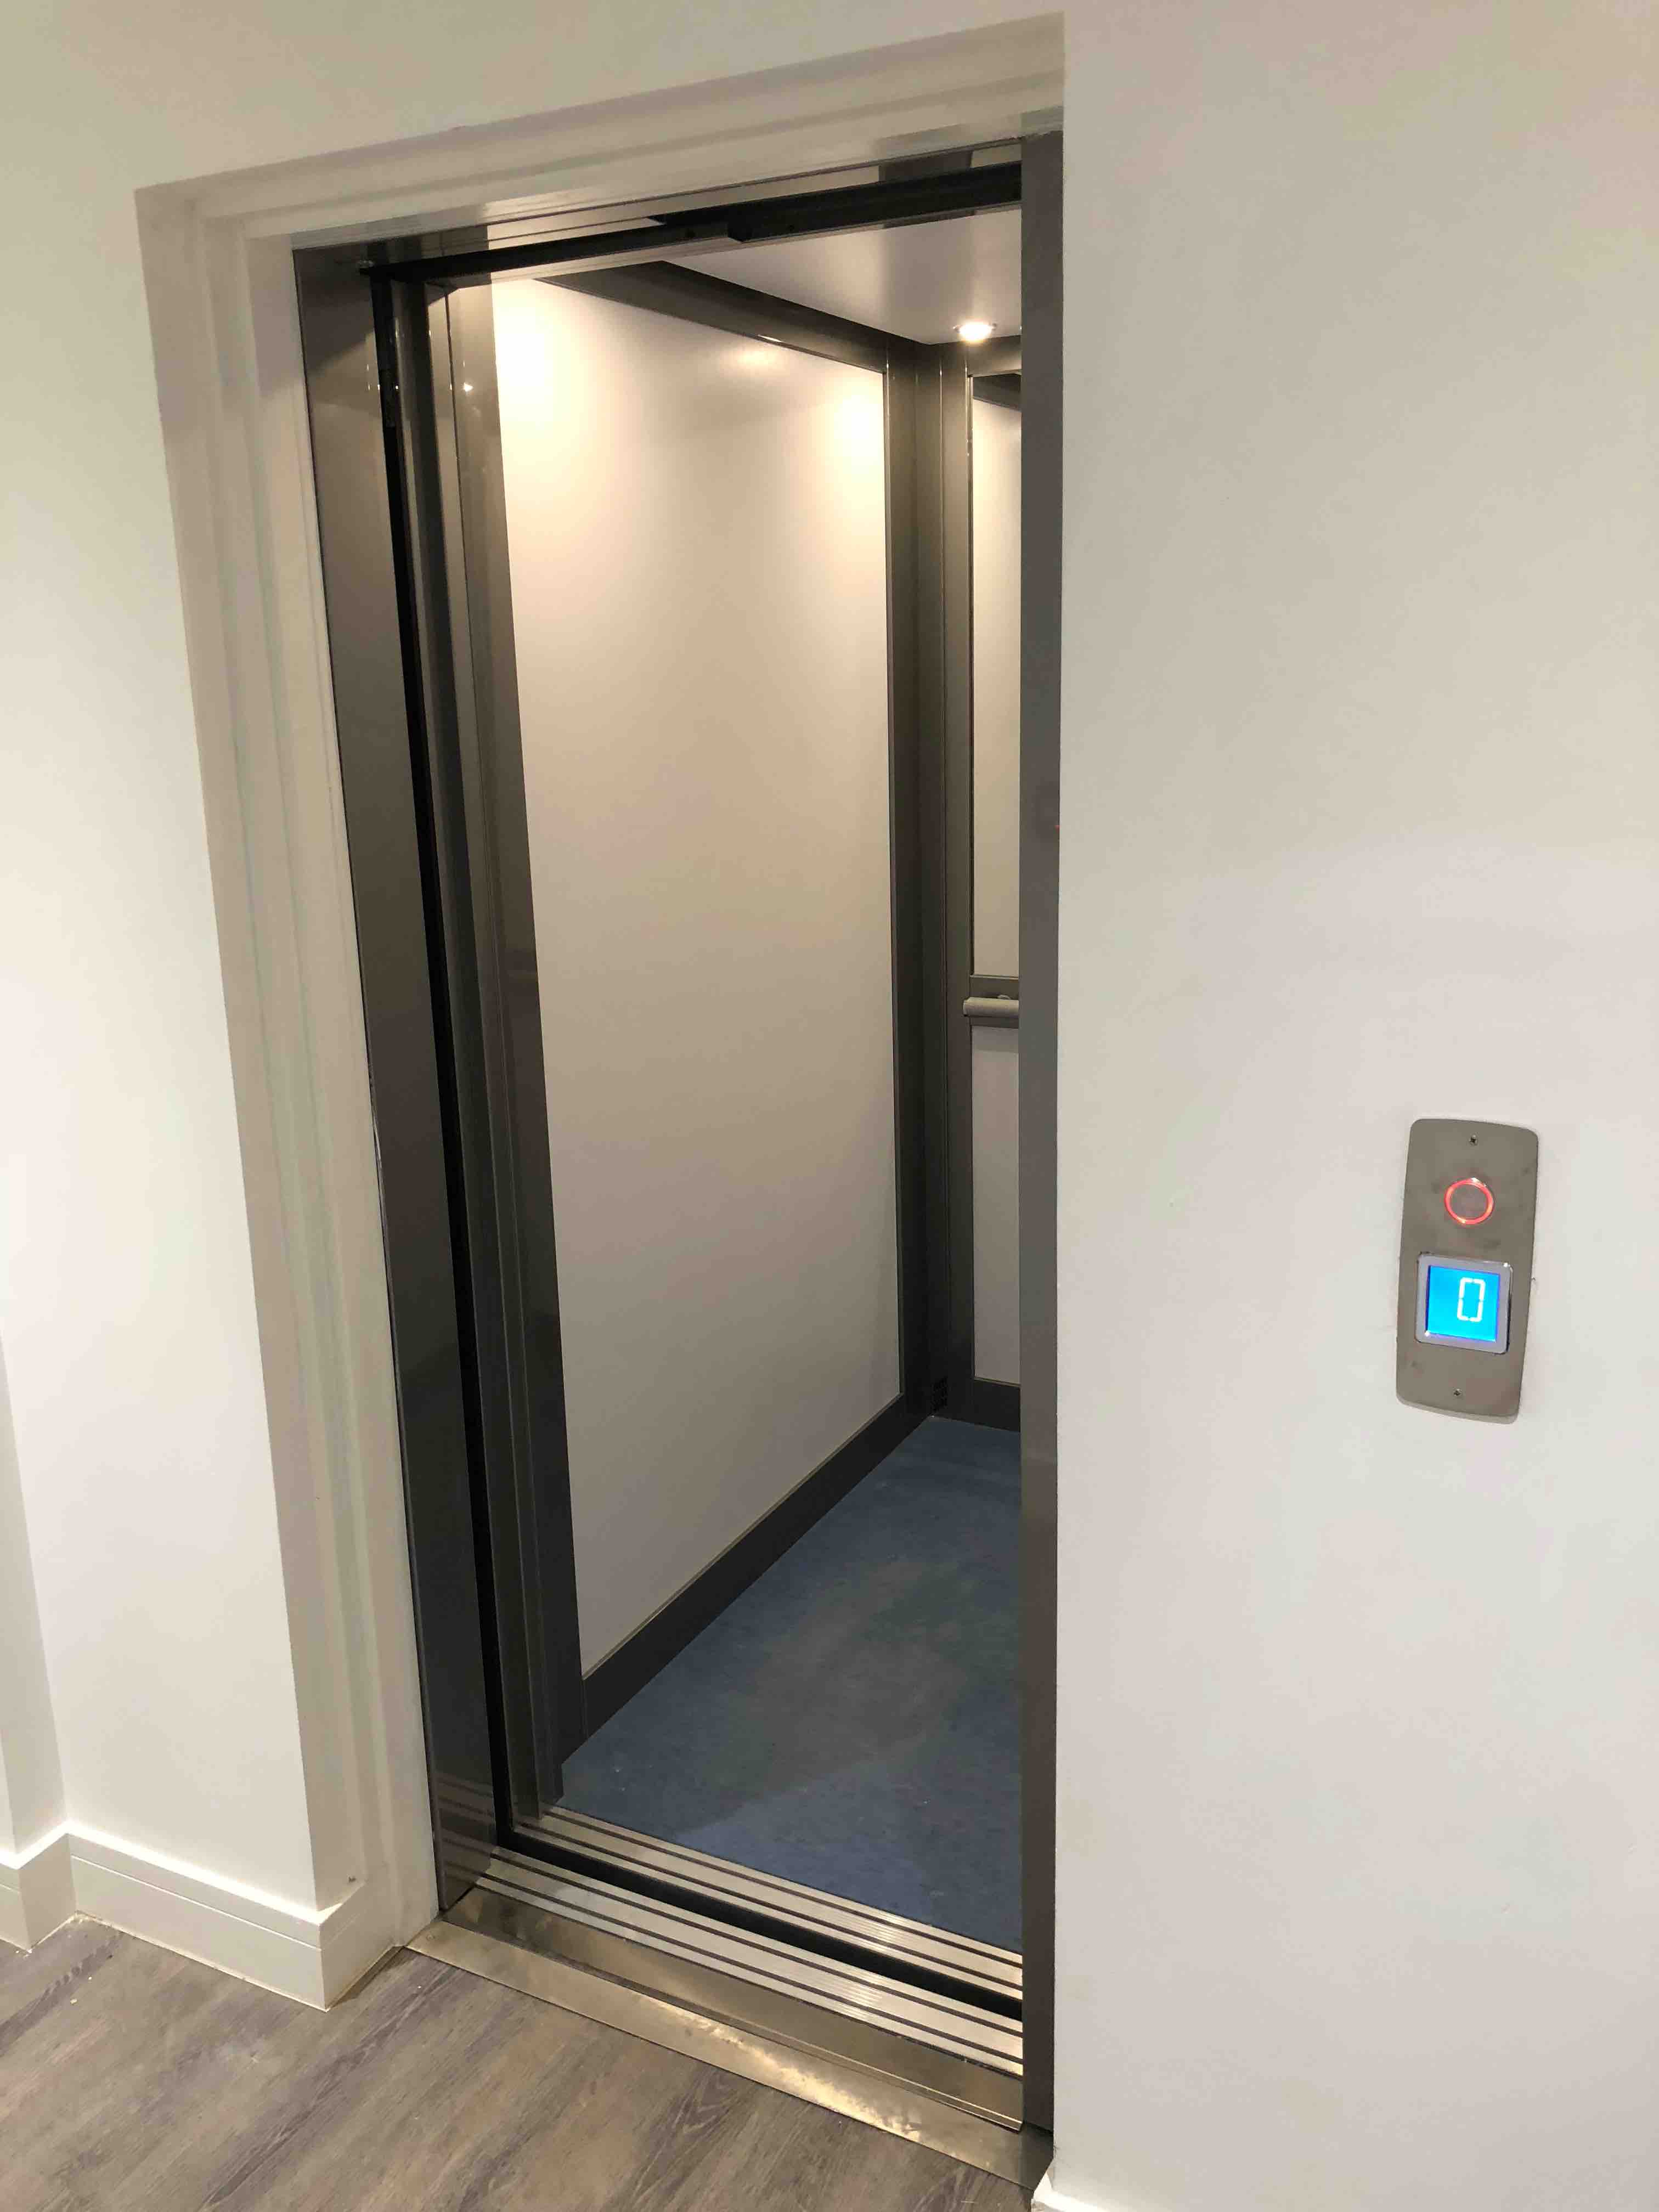 Lift for Apartment Building